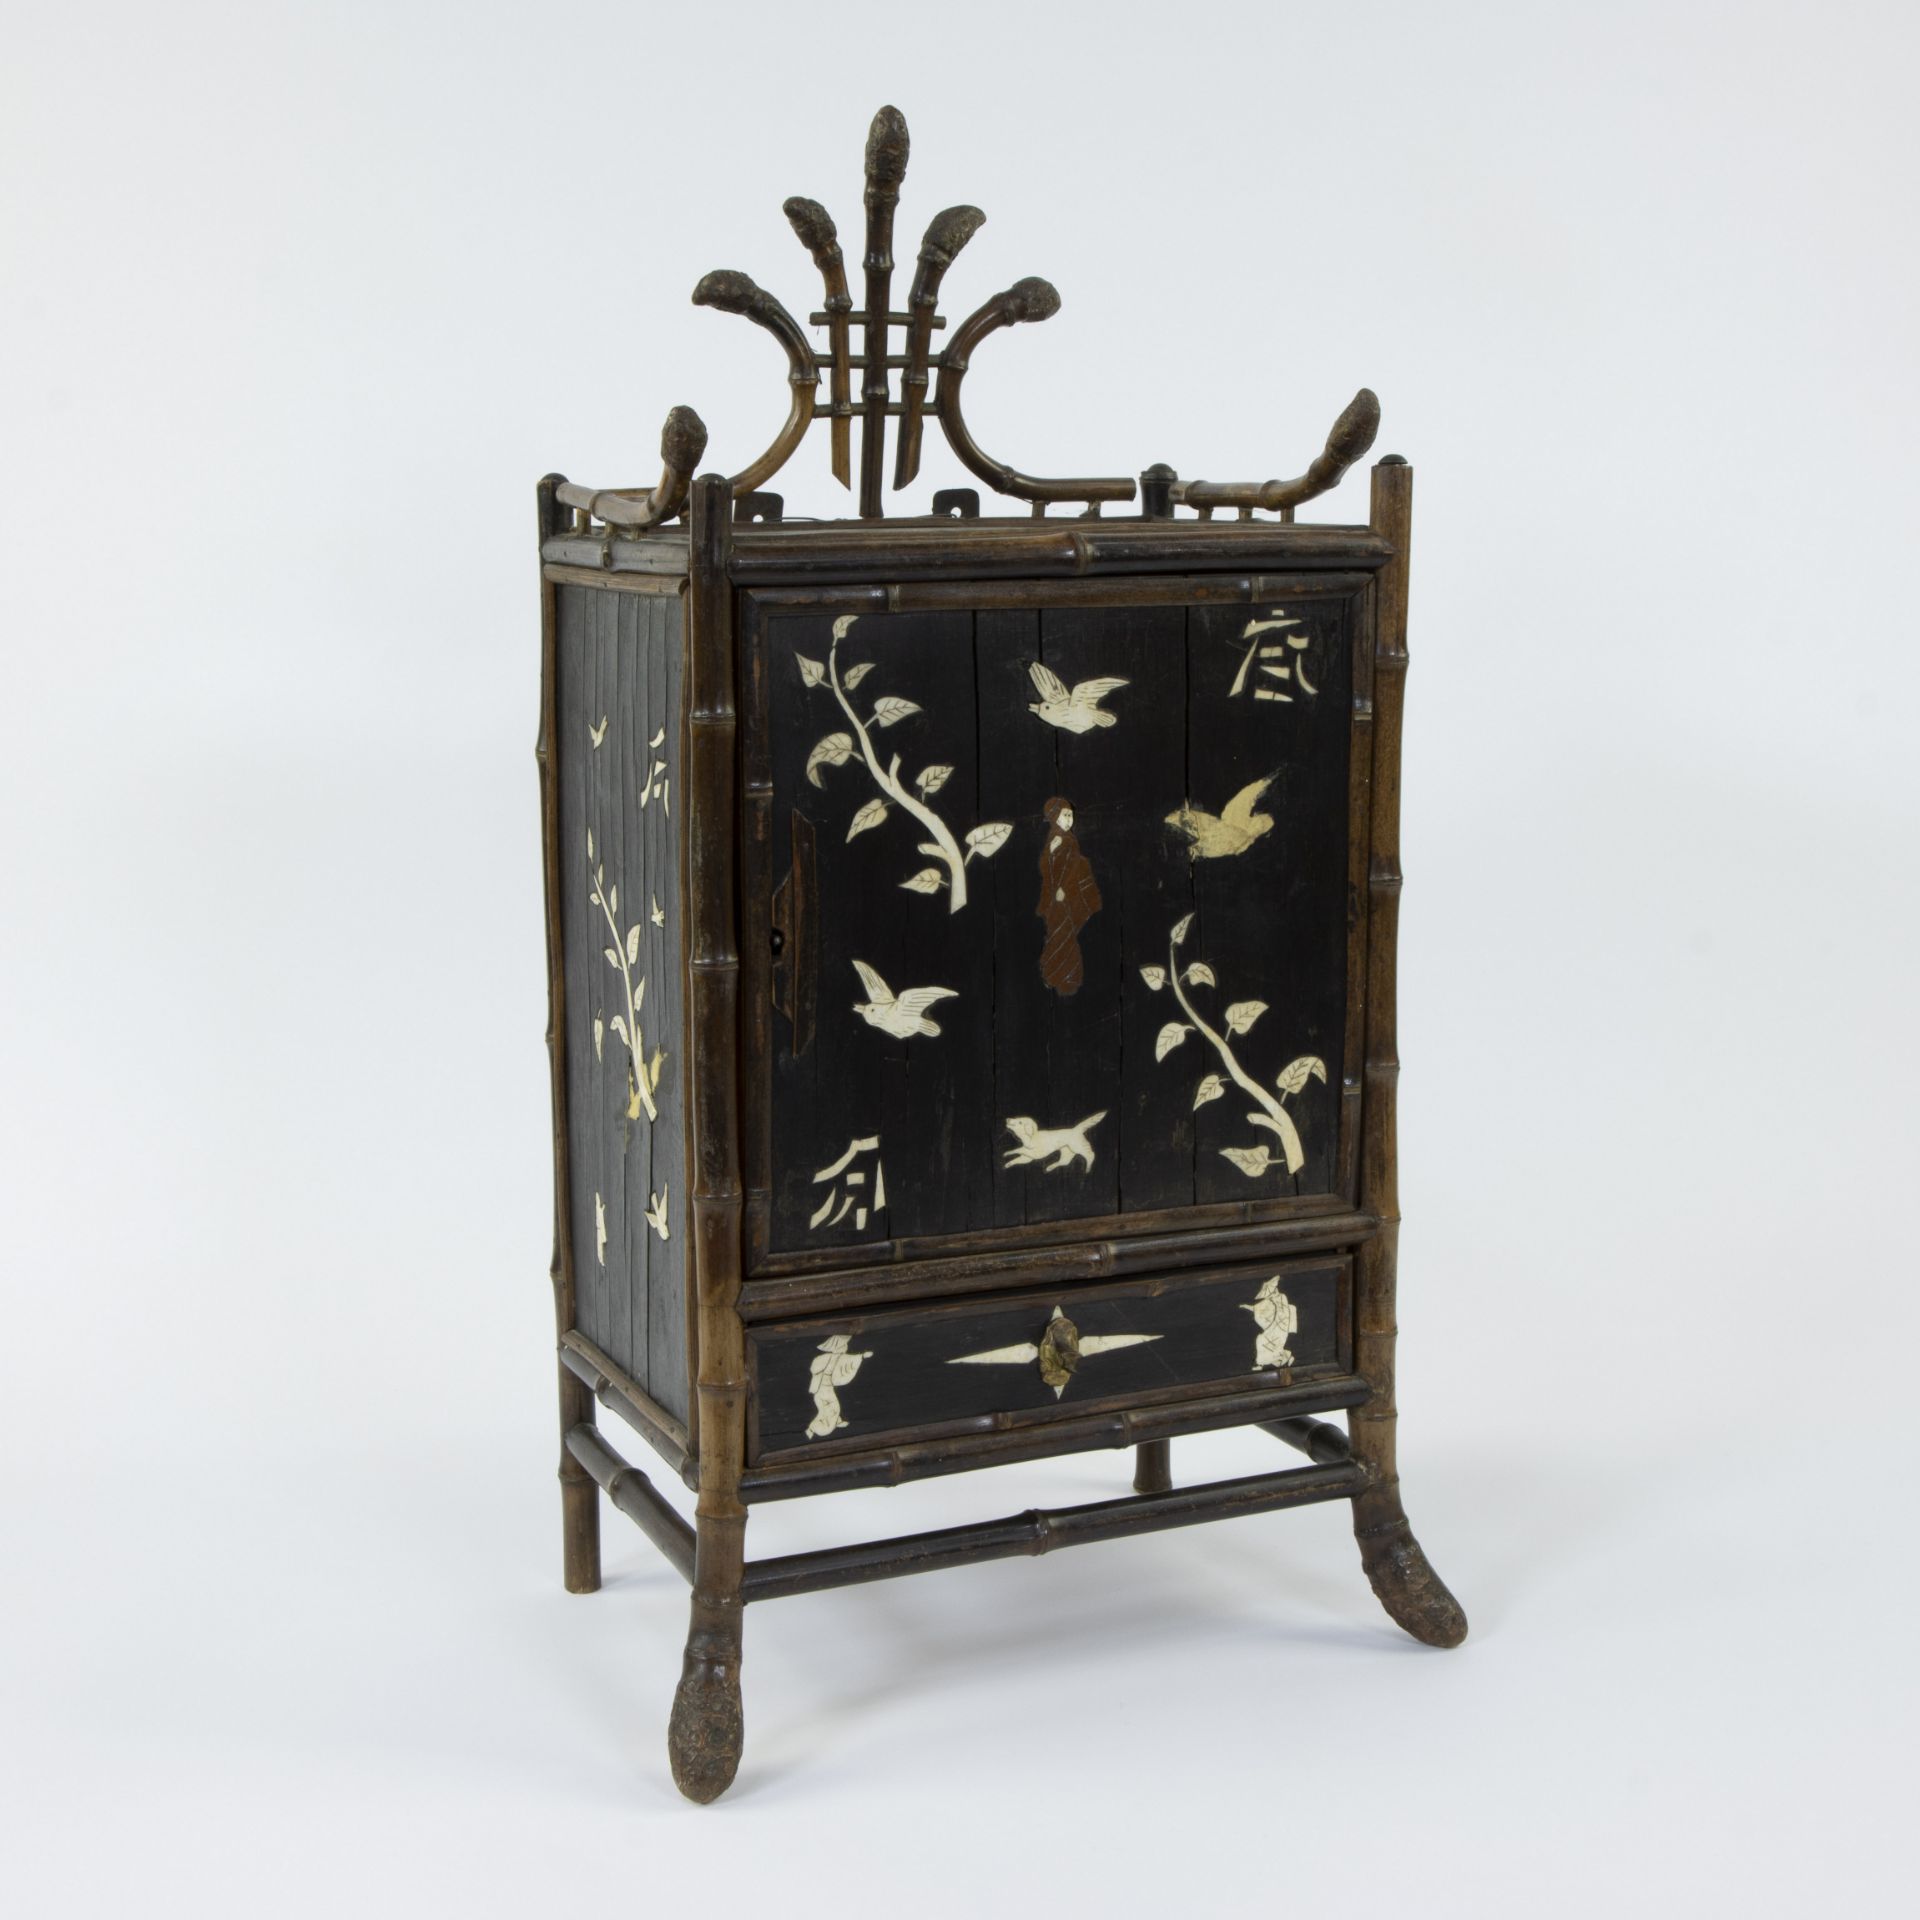 Asian bamboo cabinet with inlaid work of leaves, birds and figures in bone